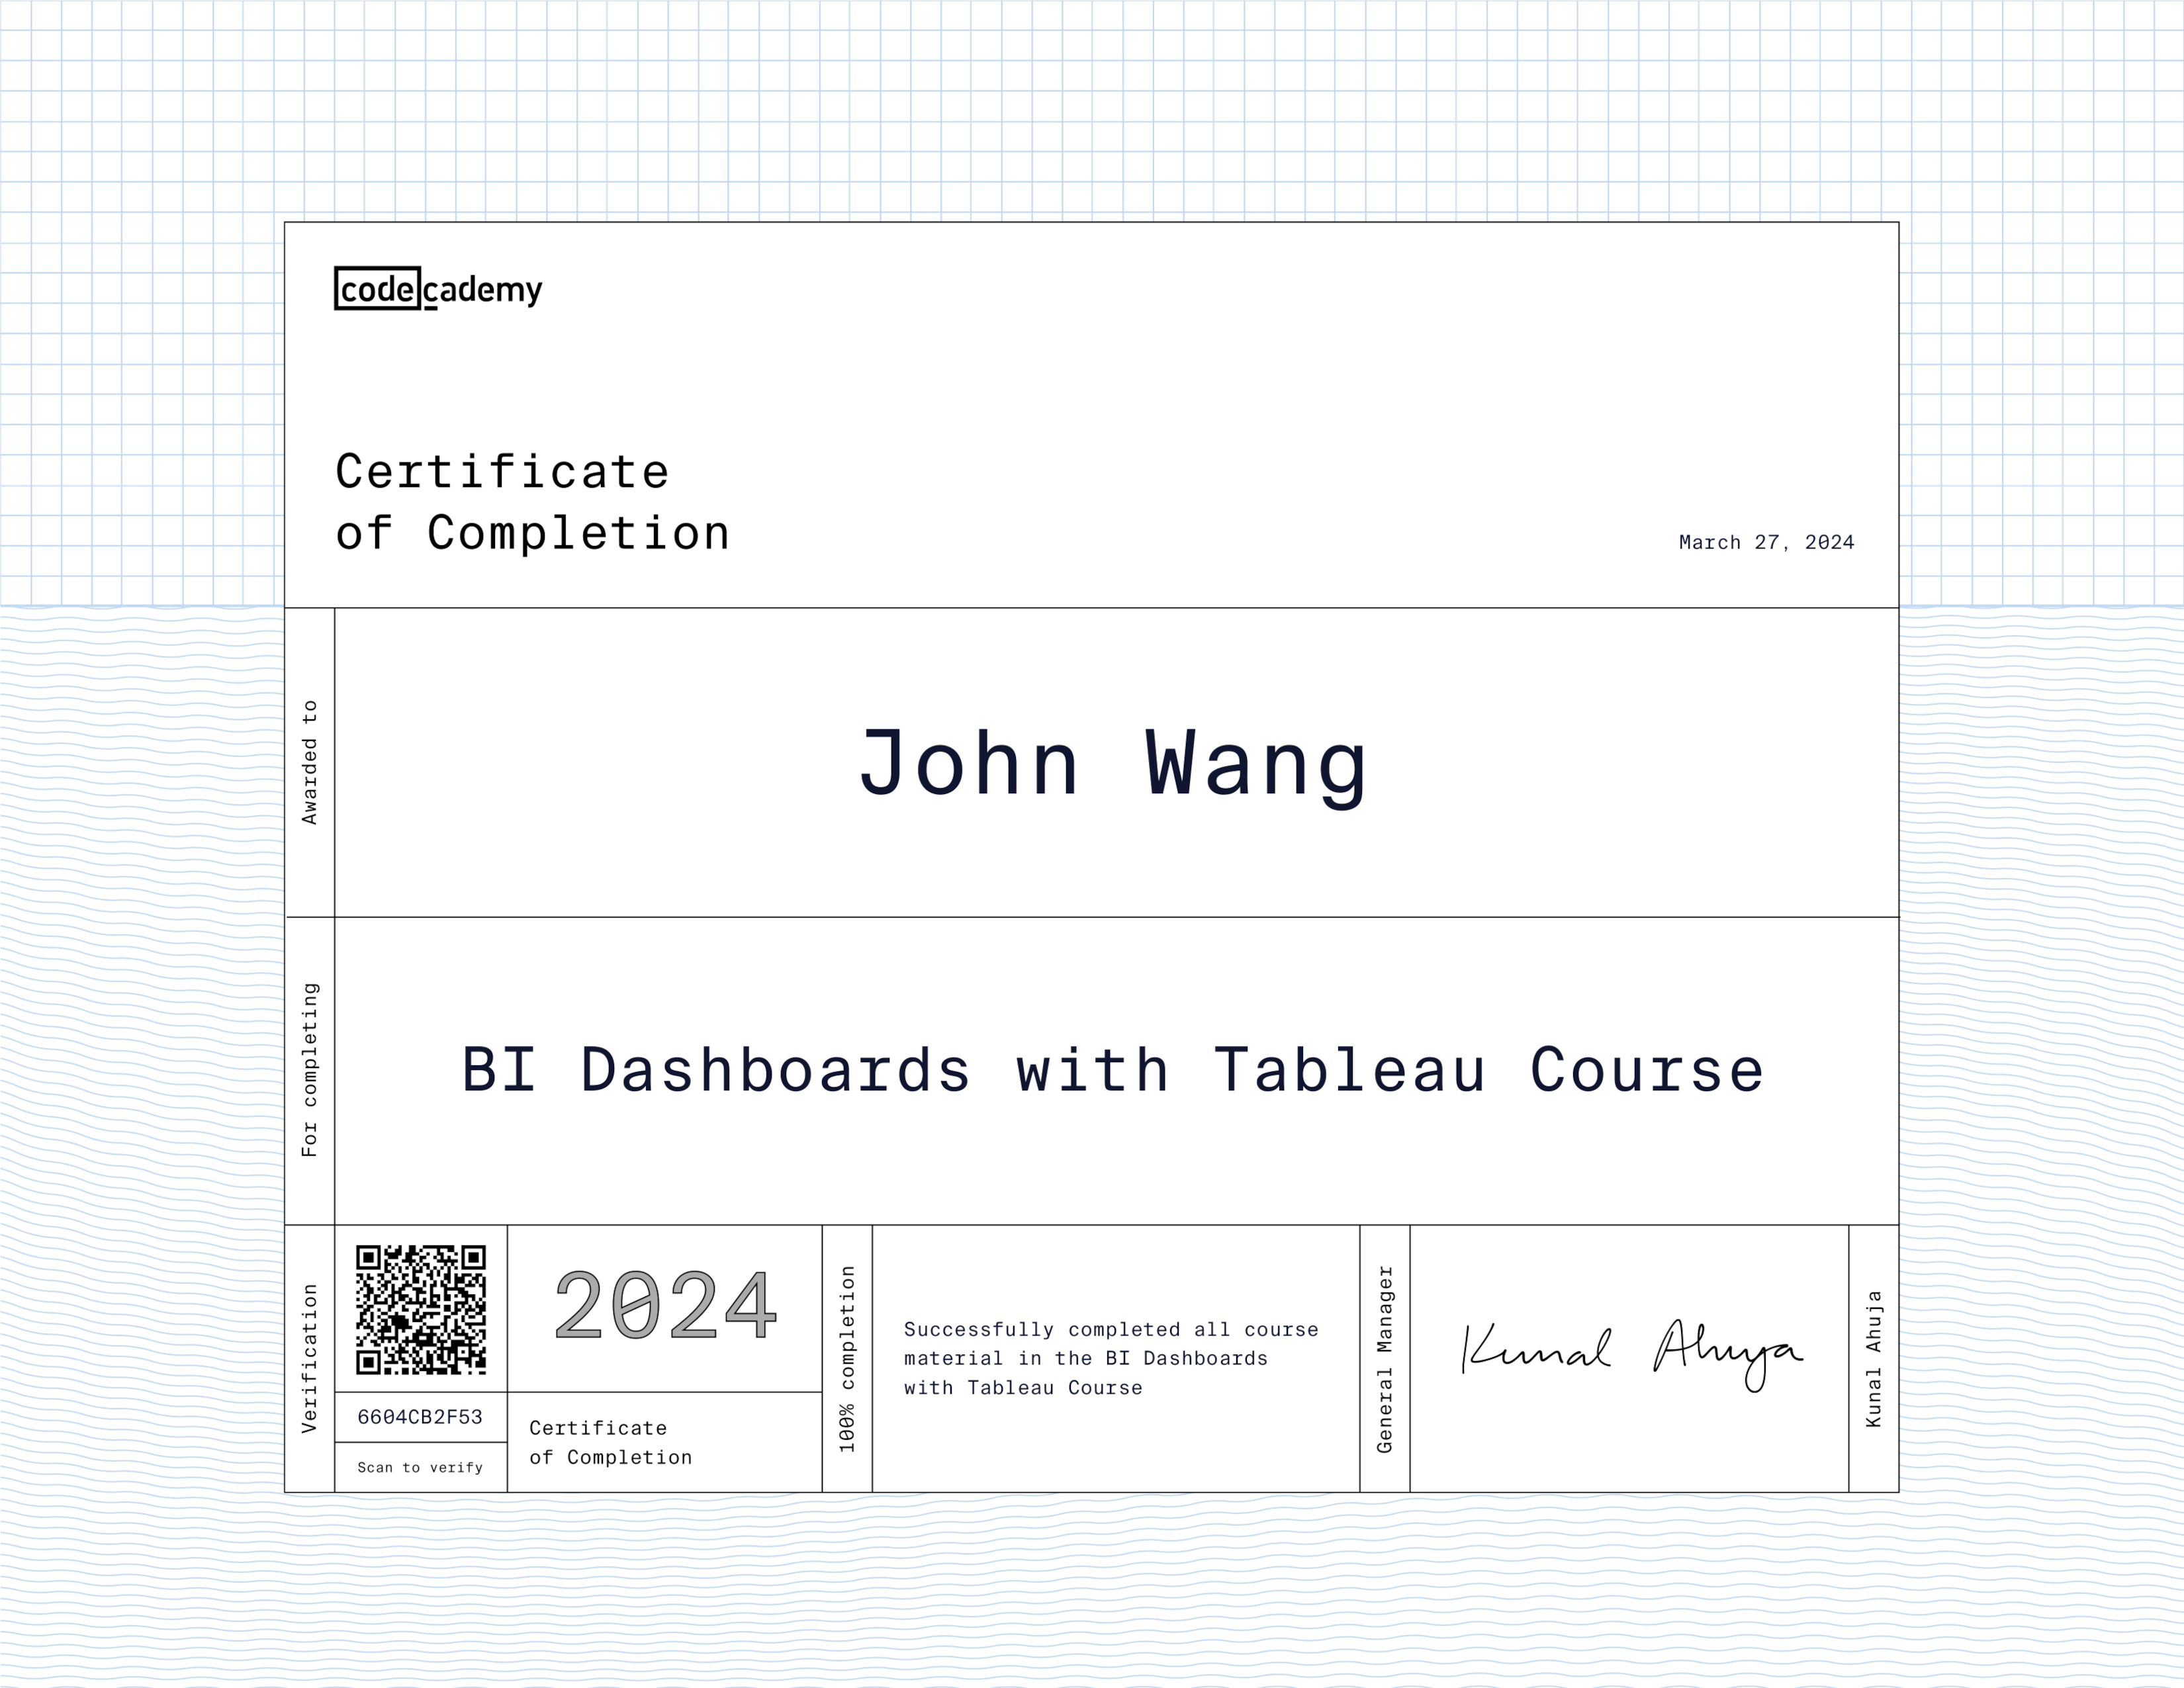 John's BI Dashboards with Tableau from Codecademy